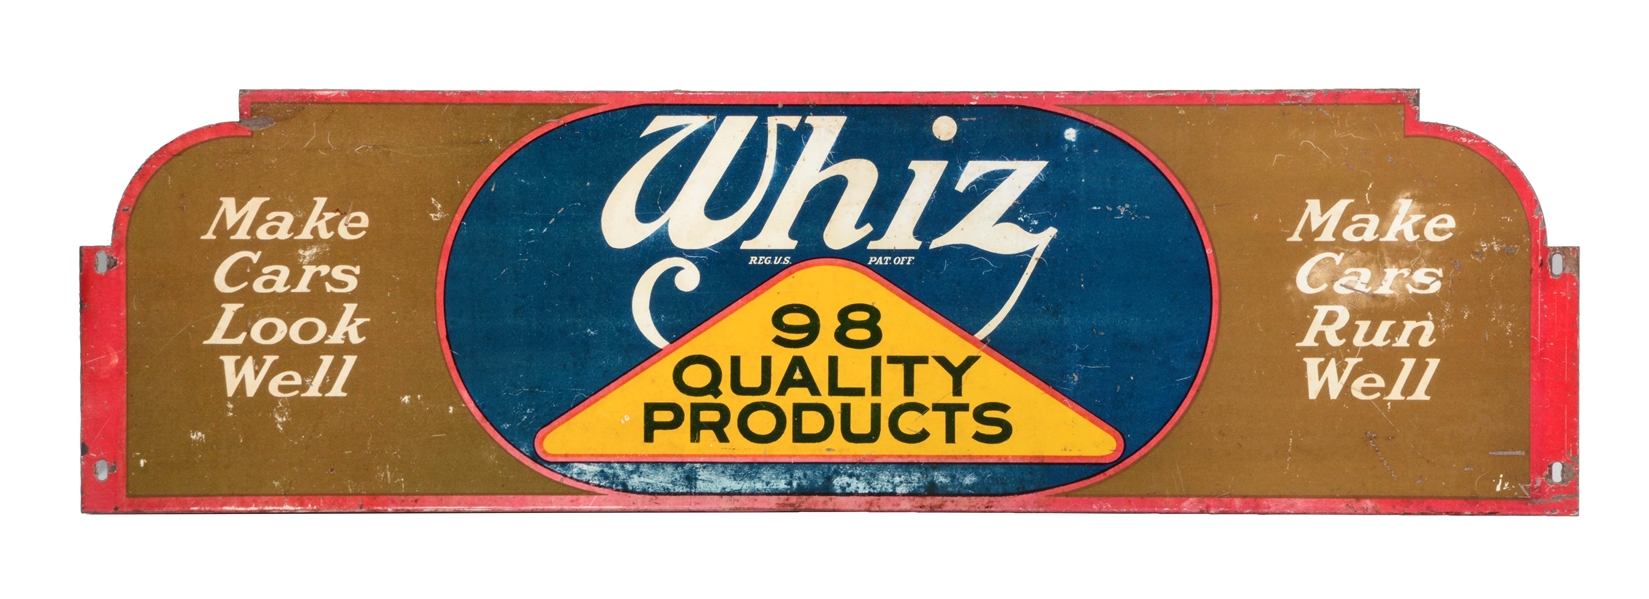 WHIZ QUALITY PRODUCTS TIN DISPLAY RACK TOPPER SIGN.